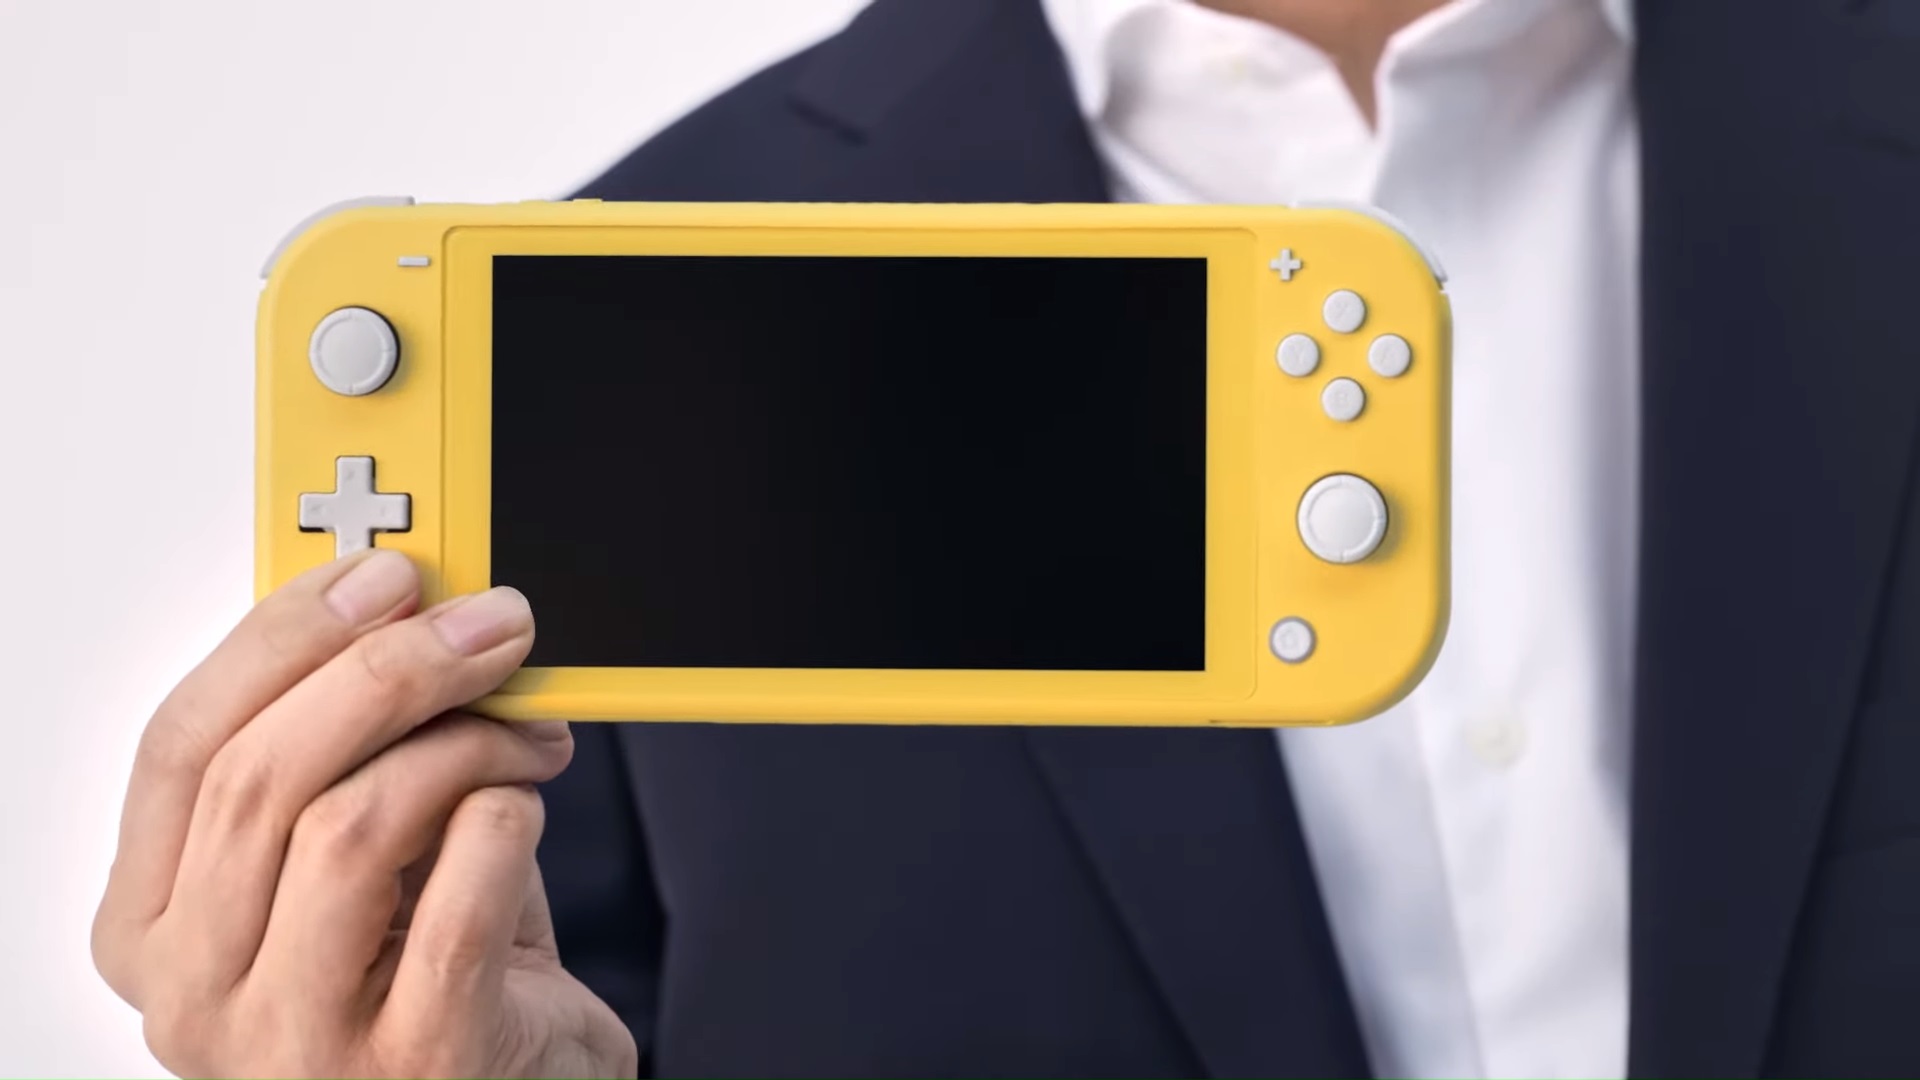 is there a new nintendo coming out